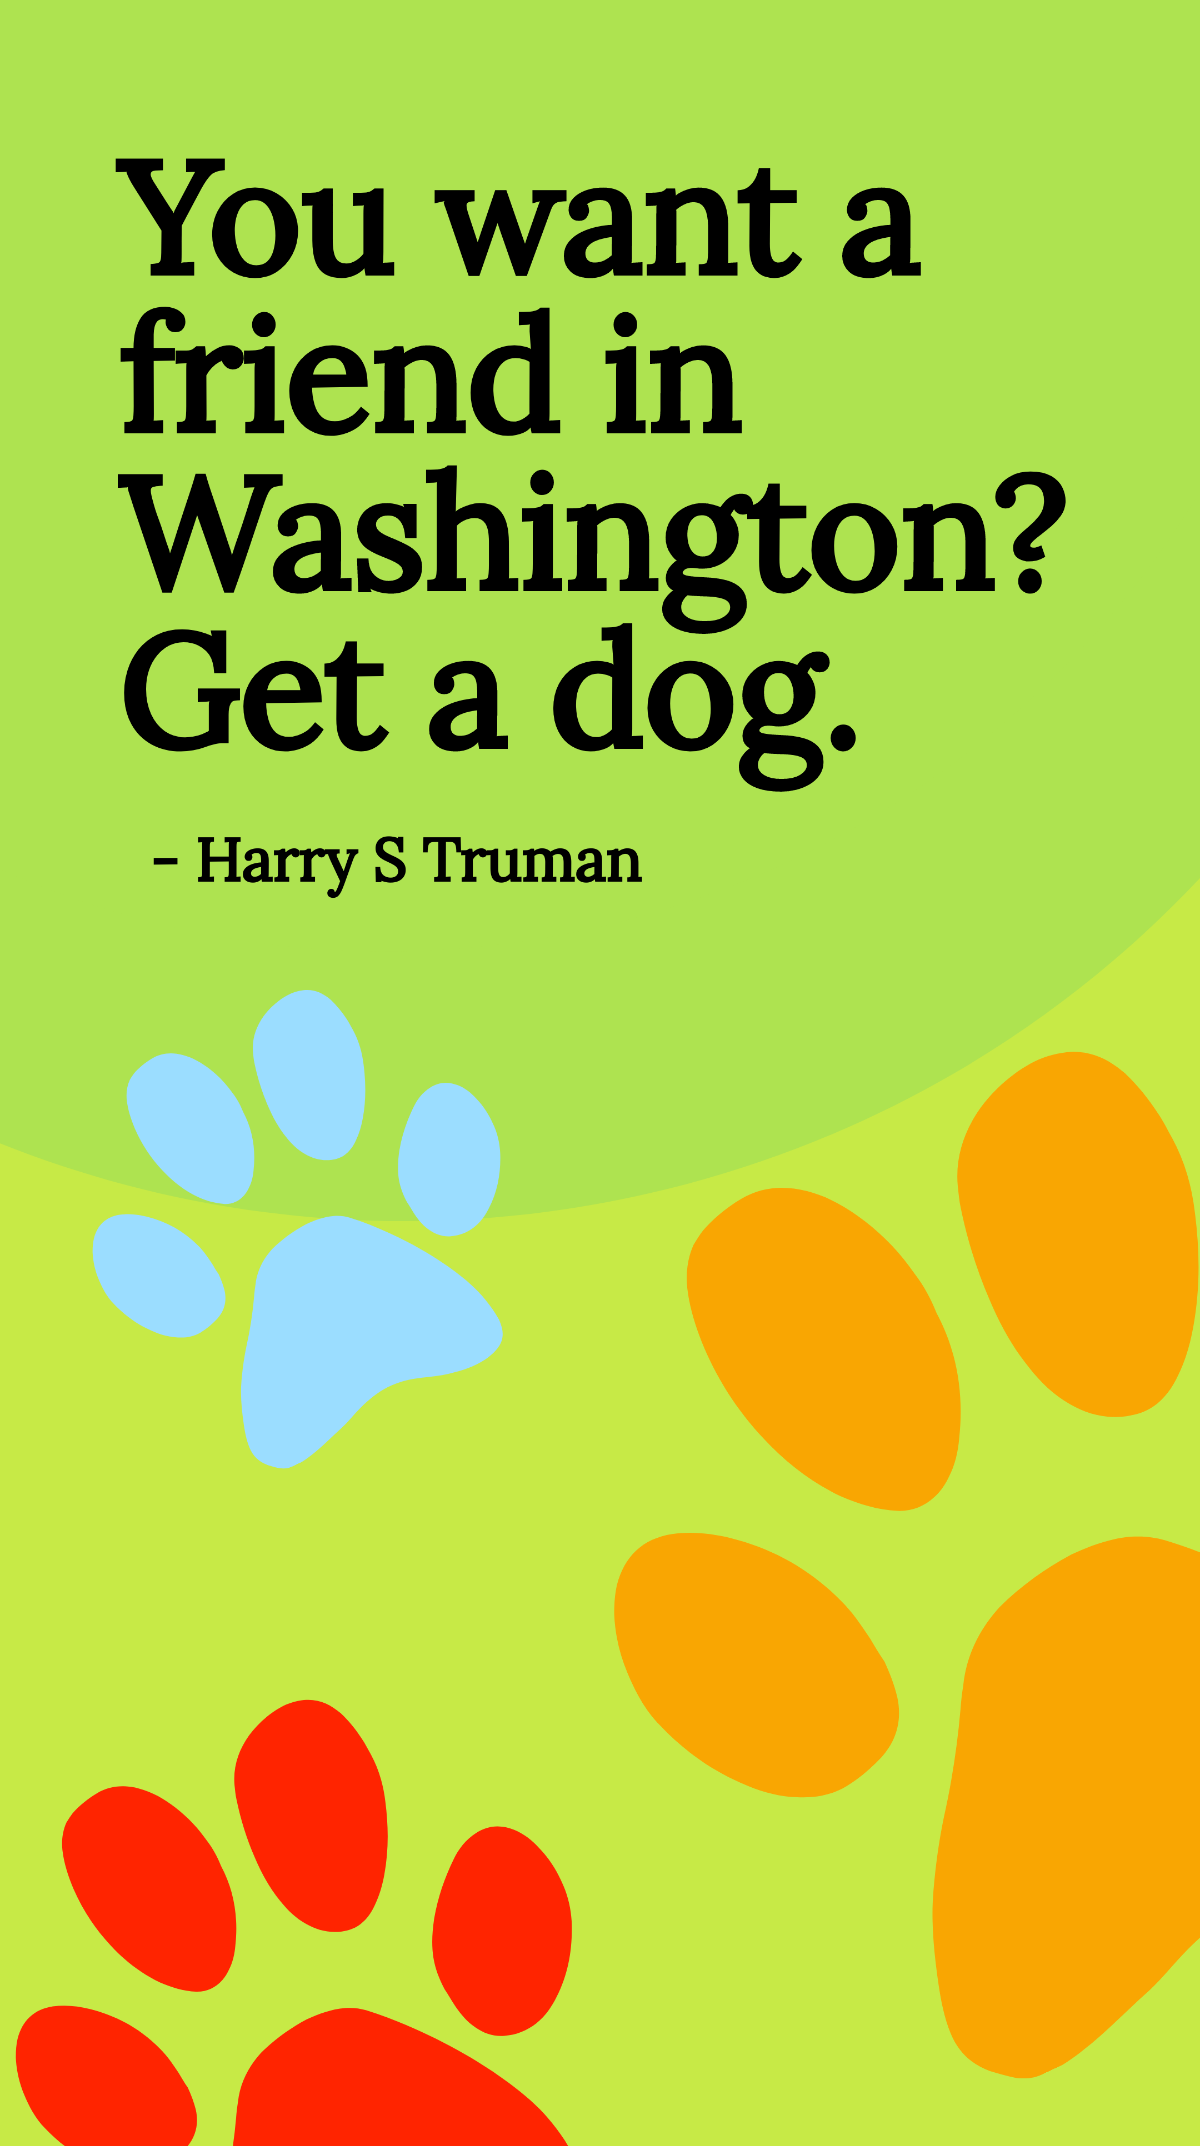 Harry S Truman - You want a friend in Washington? Get a dog. Template